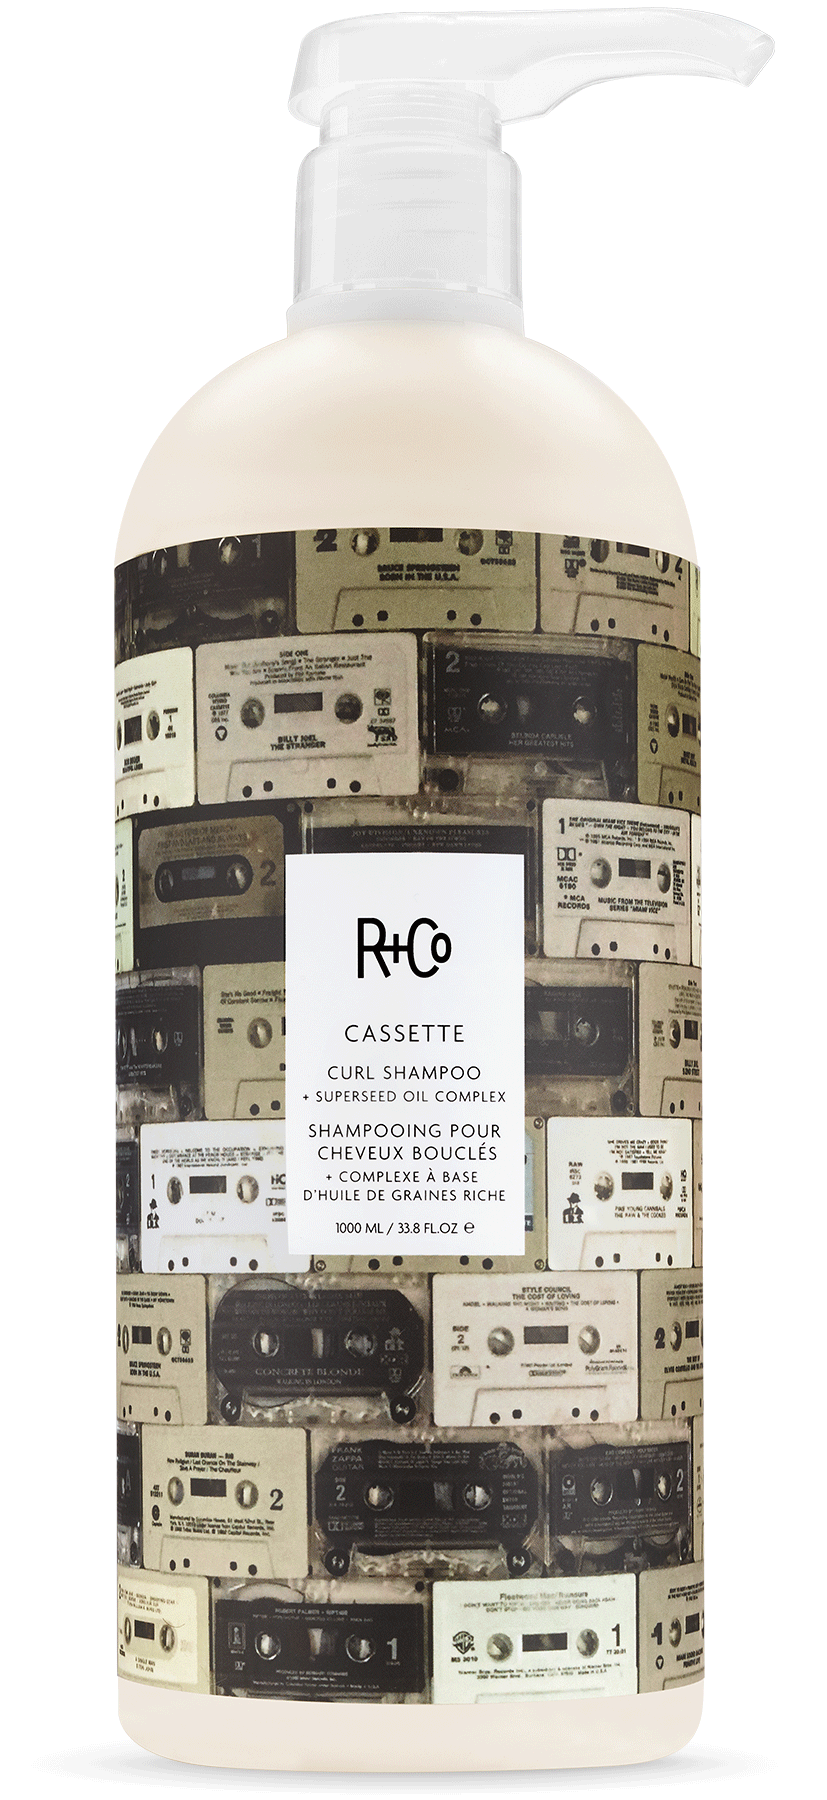 R+CO-Cassette Curl-Defining Shampoo + Superseed Oil Complex